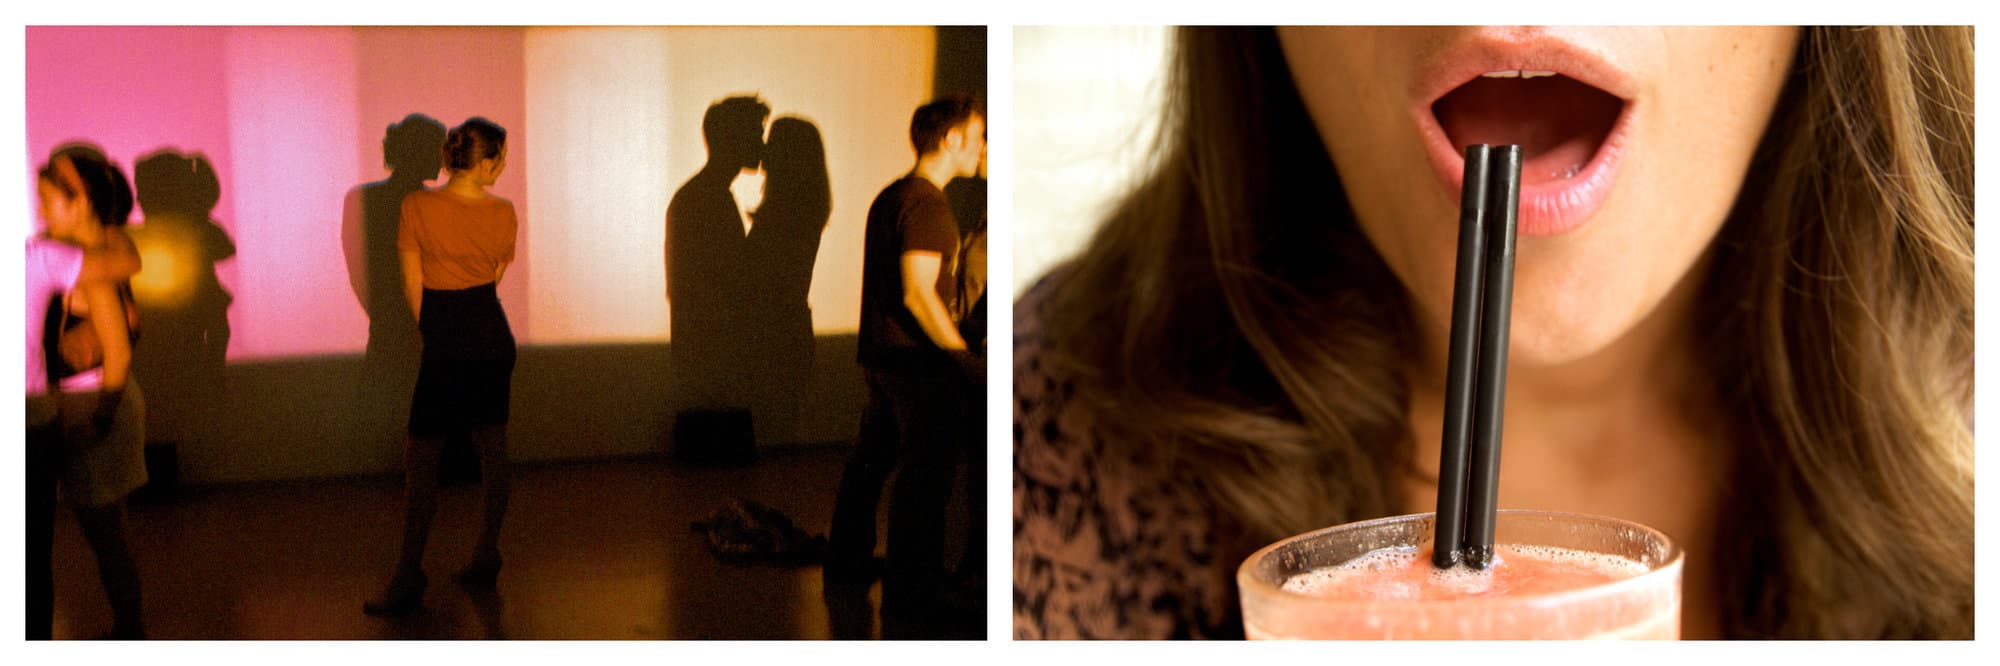 Left: A setting of what appears to be a dance party is pictured with a woman in the middle watching a couple kiss on the right. Two more people are picture on the left. Right: A photo of a woman with her mouth wide open and about to sip her glass of pink cocktail with 2 black straws.